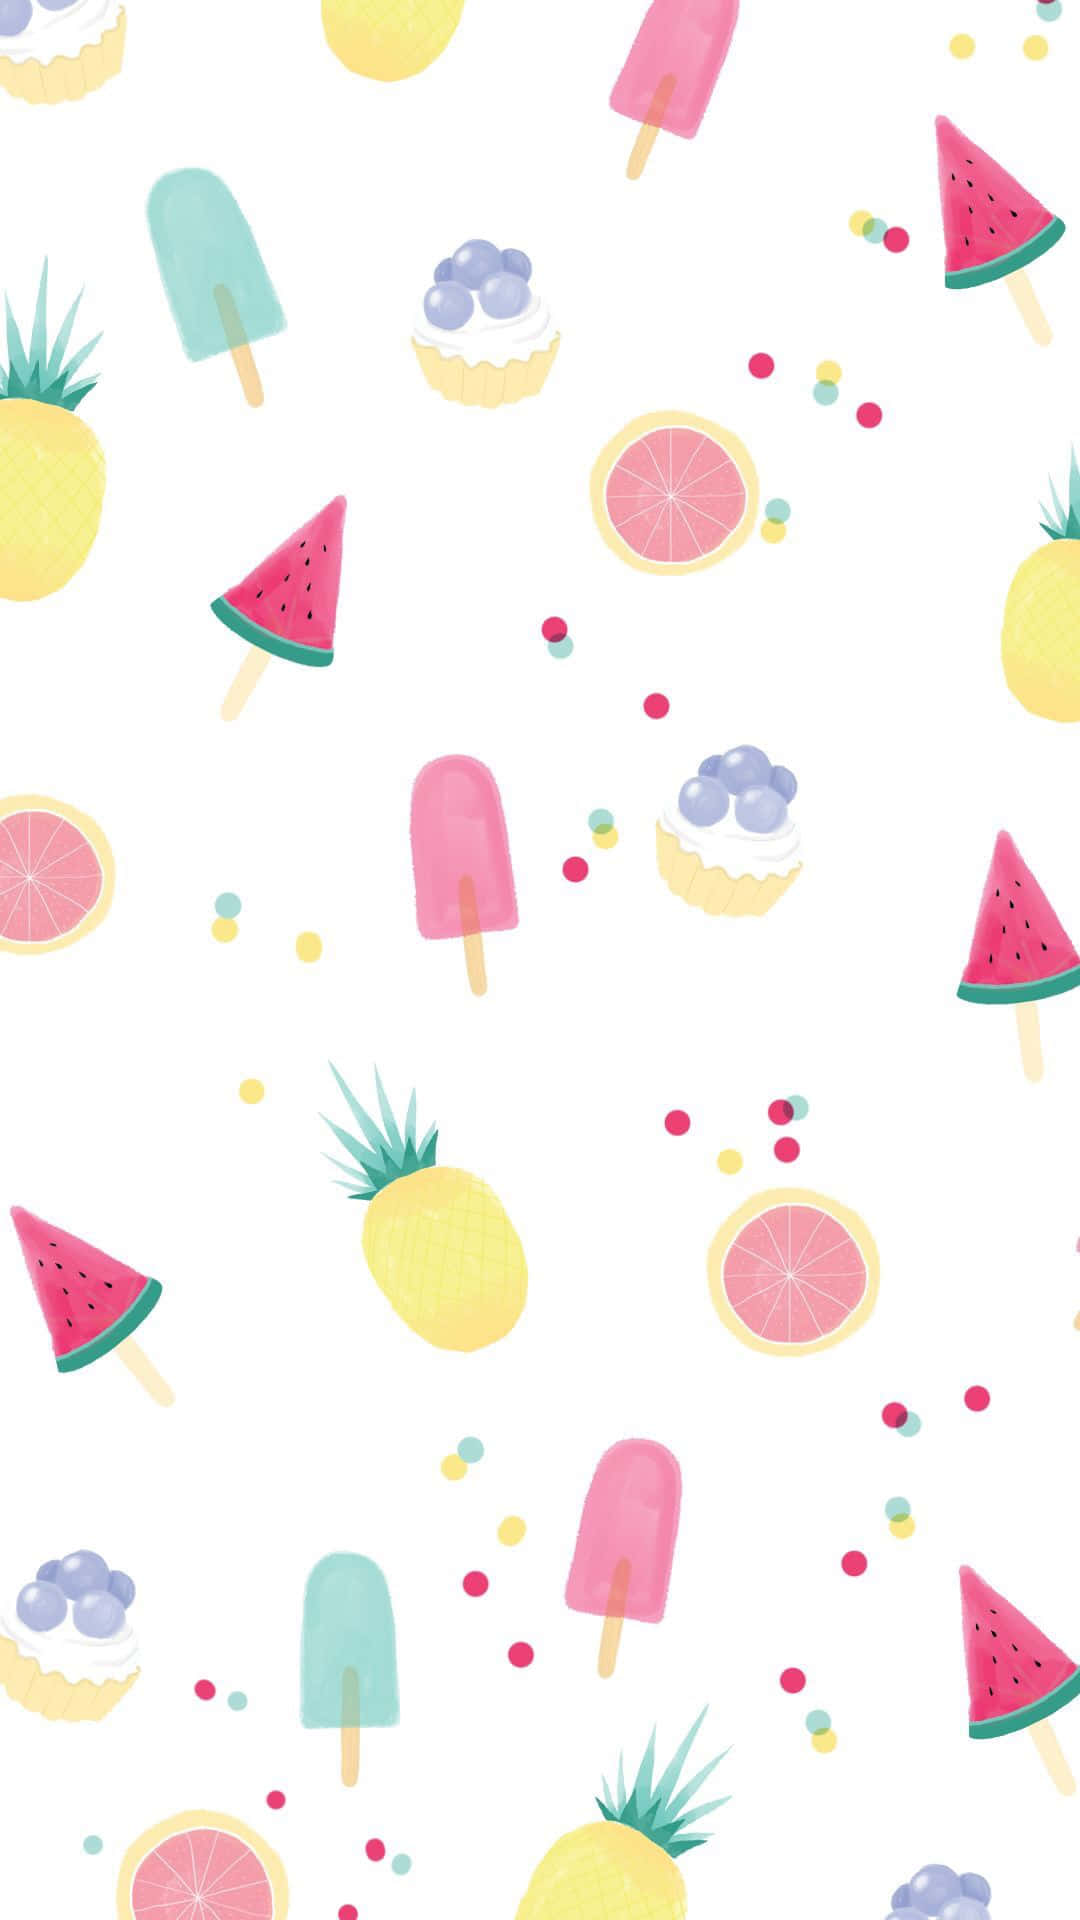 Enjoy the deliciousness of cute food right on your iPhone Wallpaper